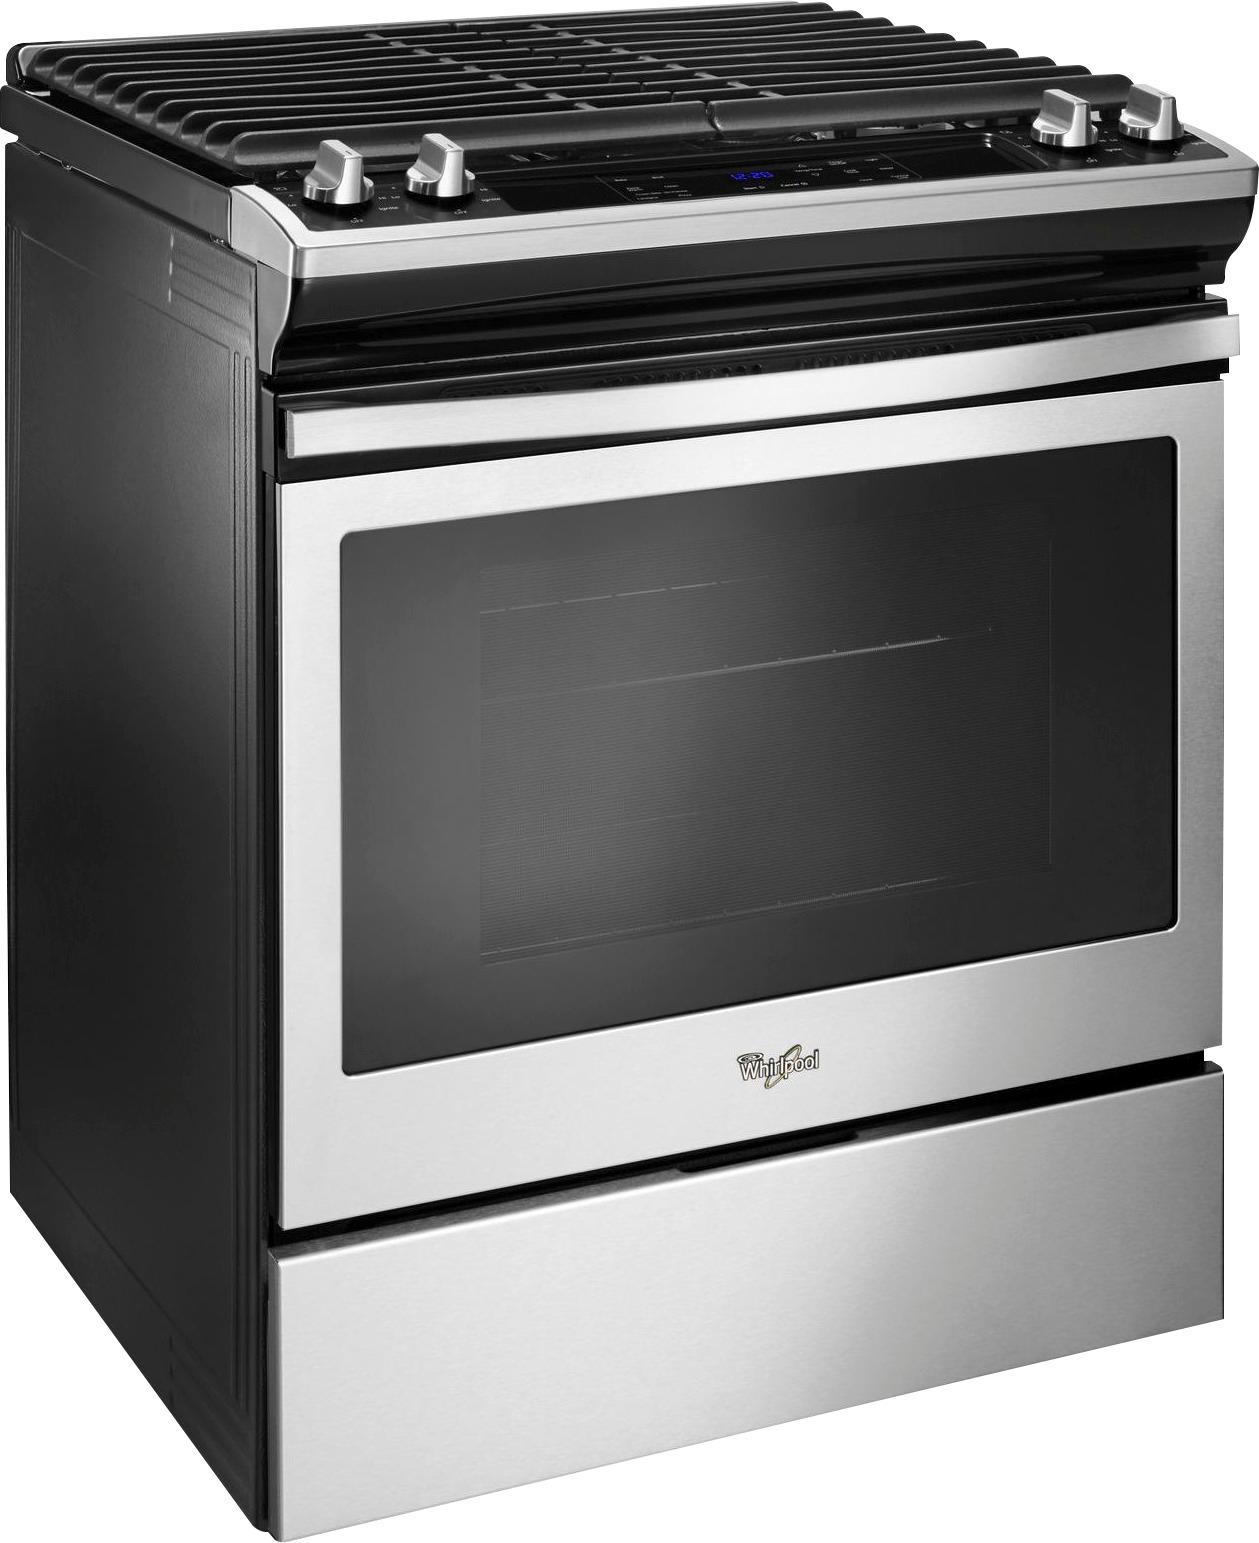 Angle View: JennAir - 6.4 Cu. Ft. Self-Cleaning Slide-In Electric Convection Range - Silver